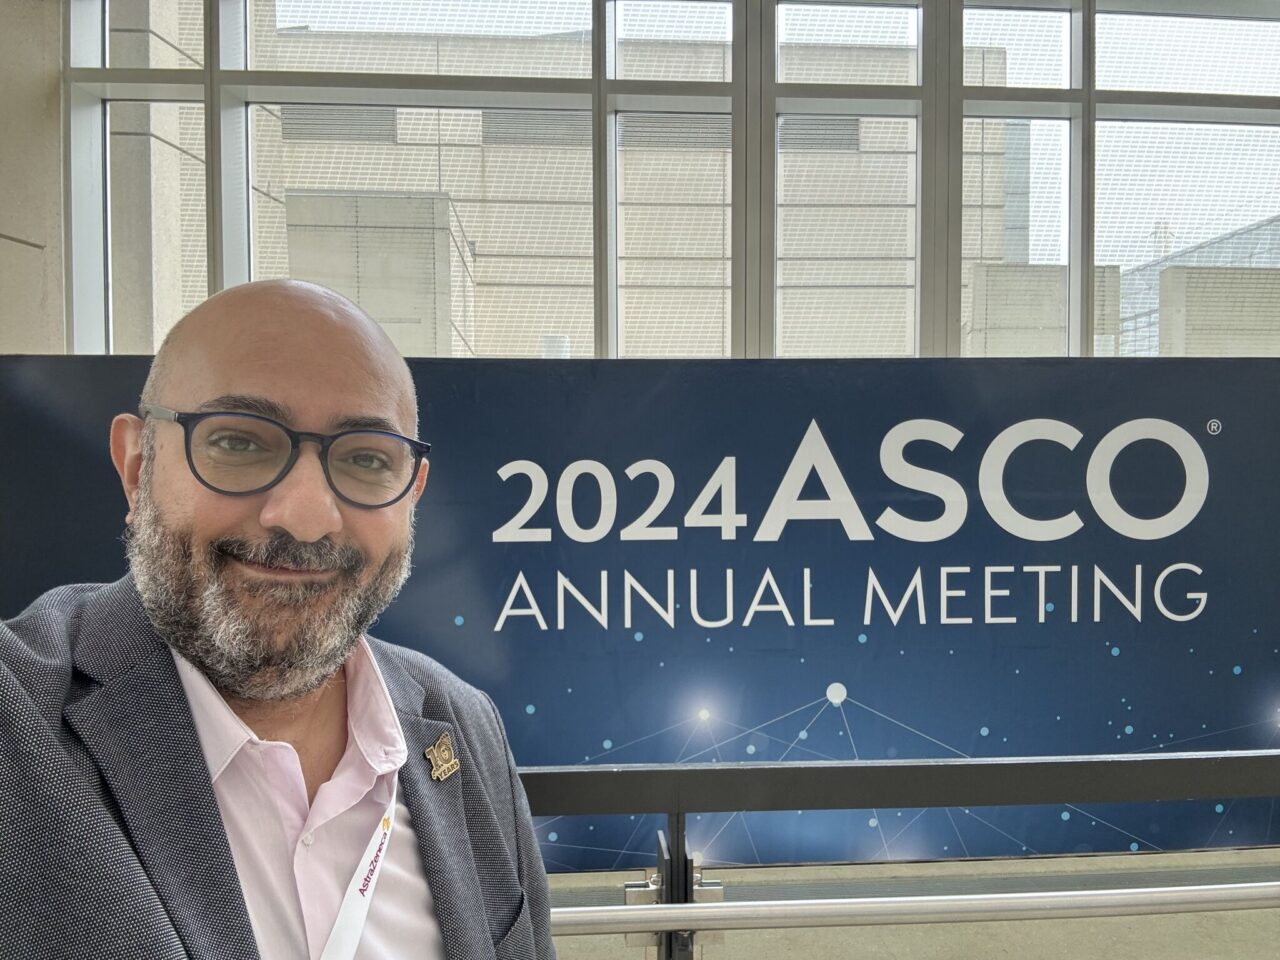 Magdy Wahib: My key reflections from ASCO 2024